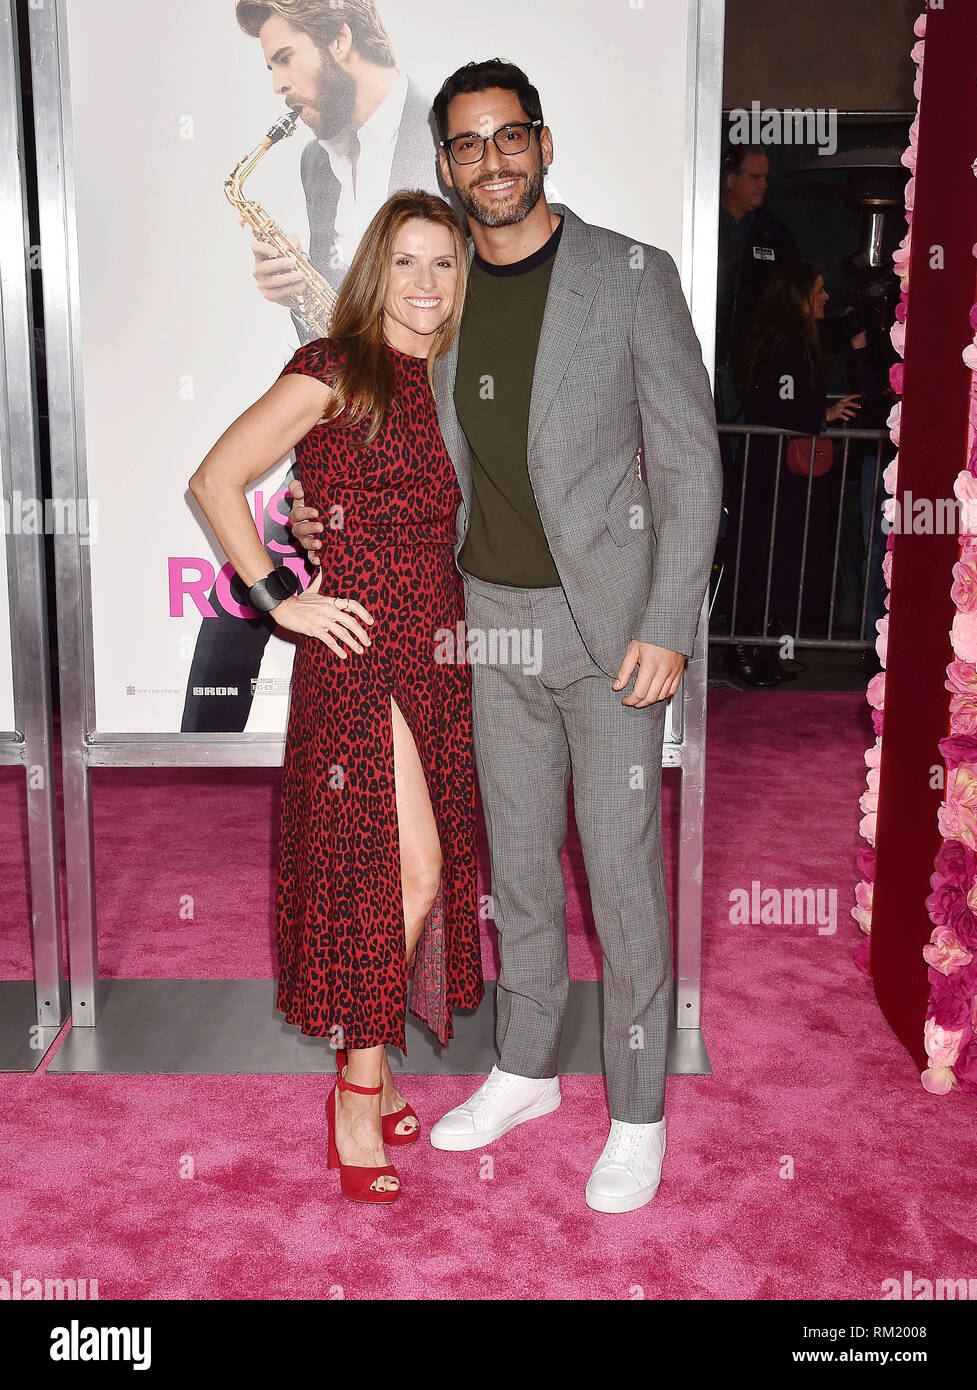 LOS ANGELES, CA - FEBRUARY 11: Gina Matthews (L) and Tom Ellis arrive at the Premiere Of Warner Bros. Pictures' 'Isn't It Romantic' at The Theatre at  Stock Photo